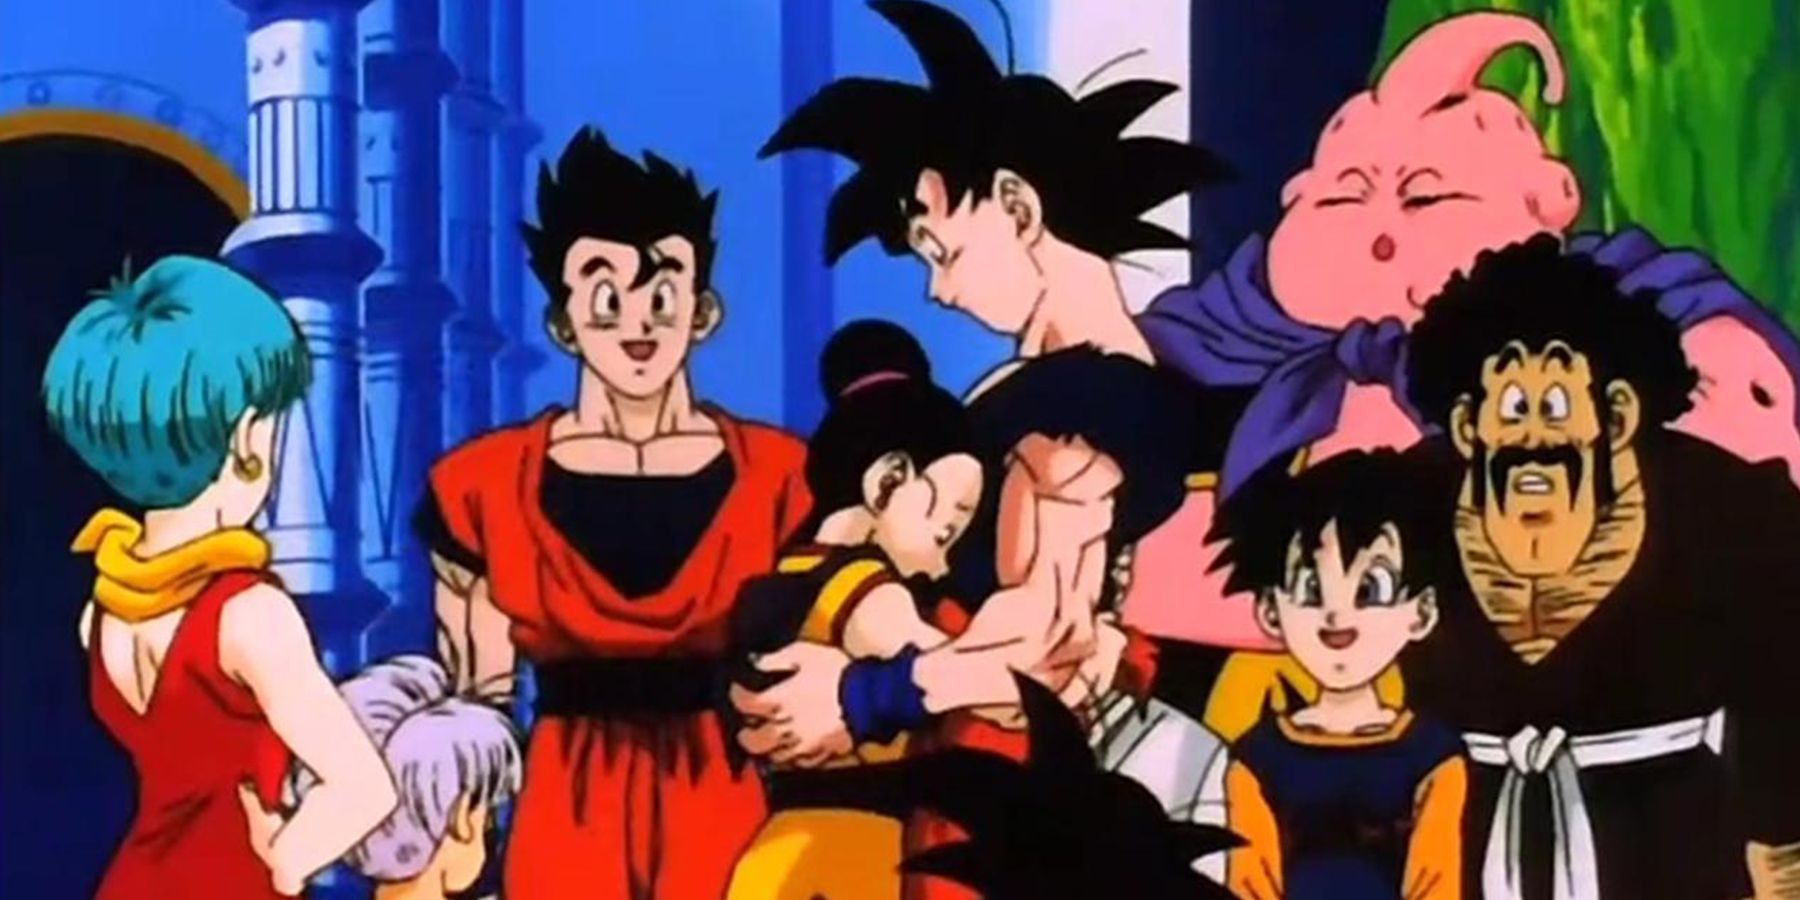 A collection of characters from the Dragon Ball Z anime series.